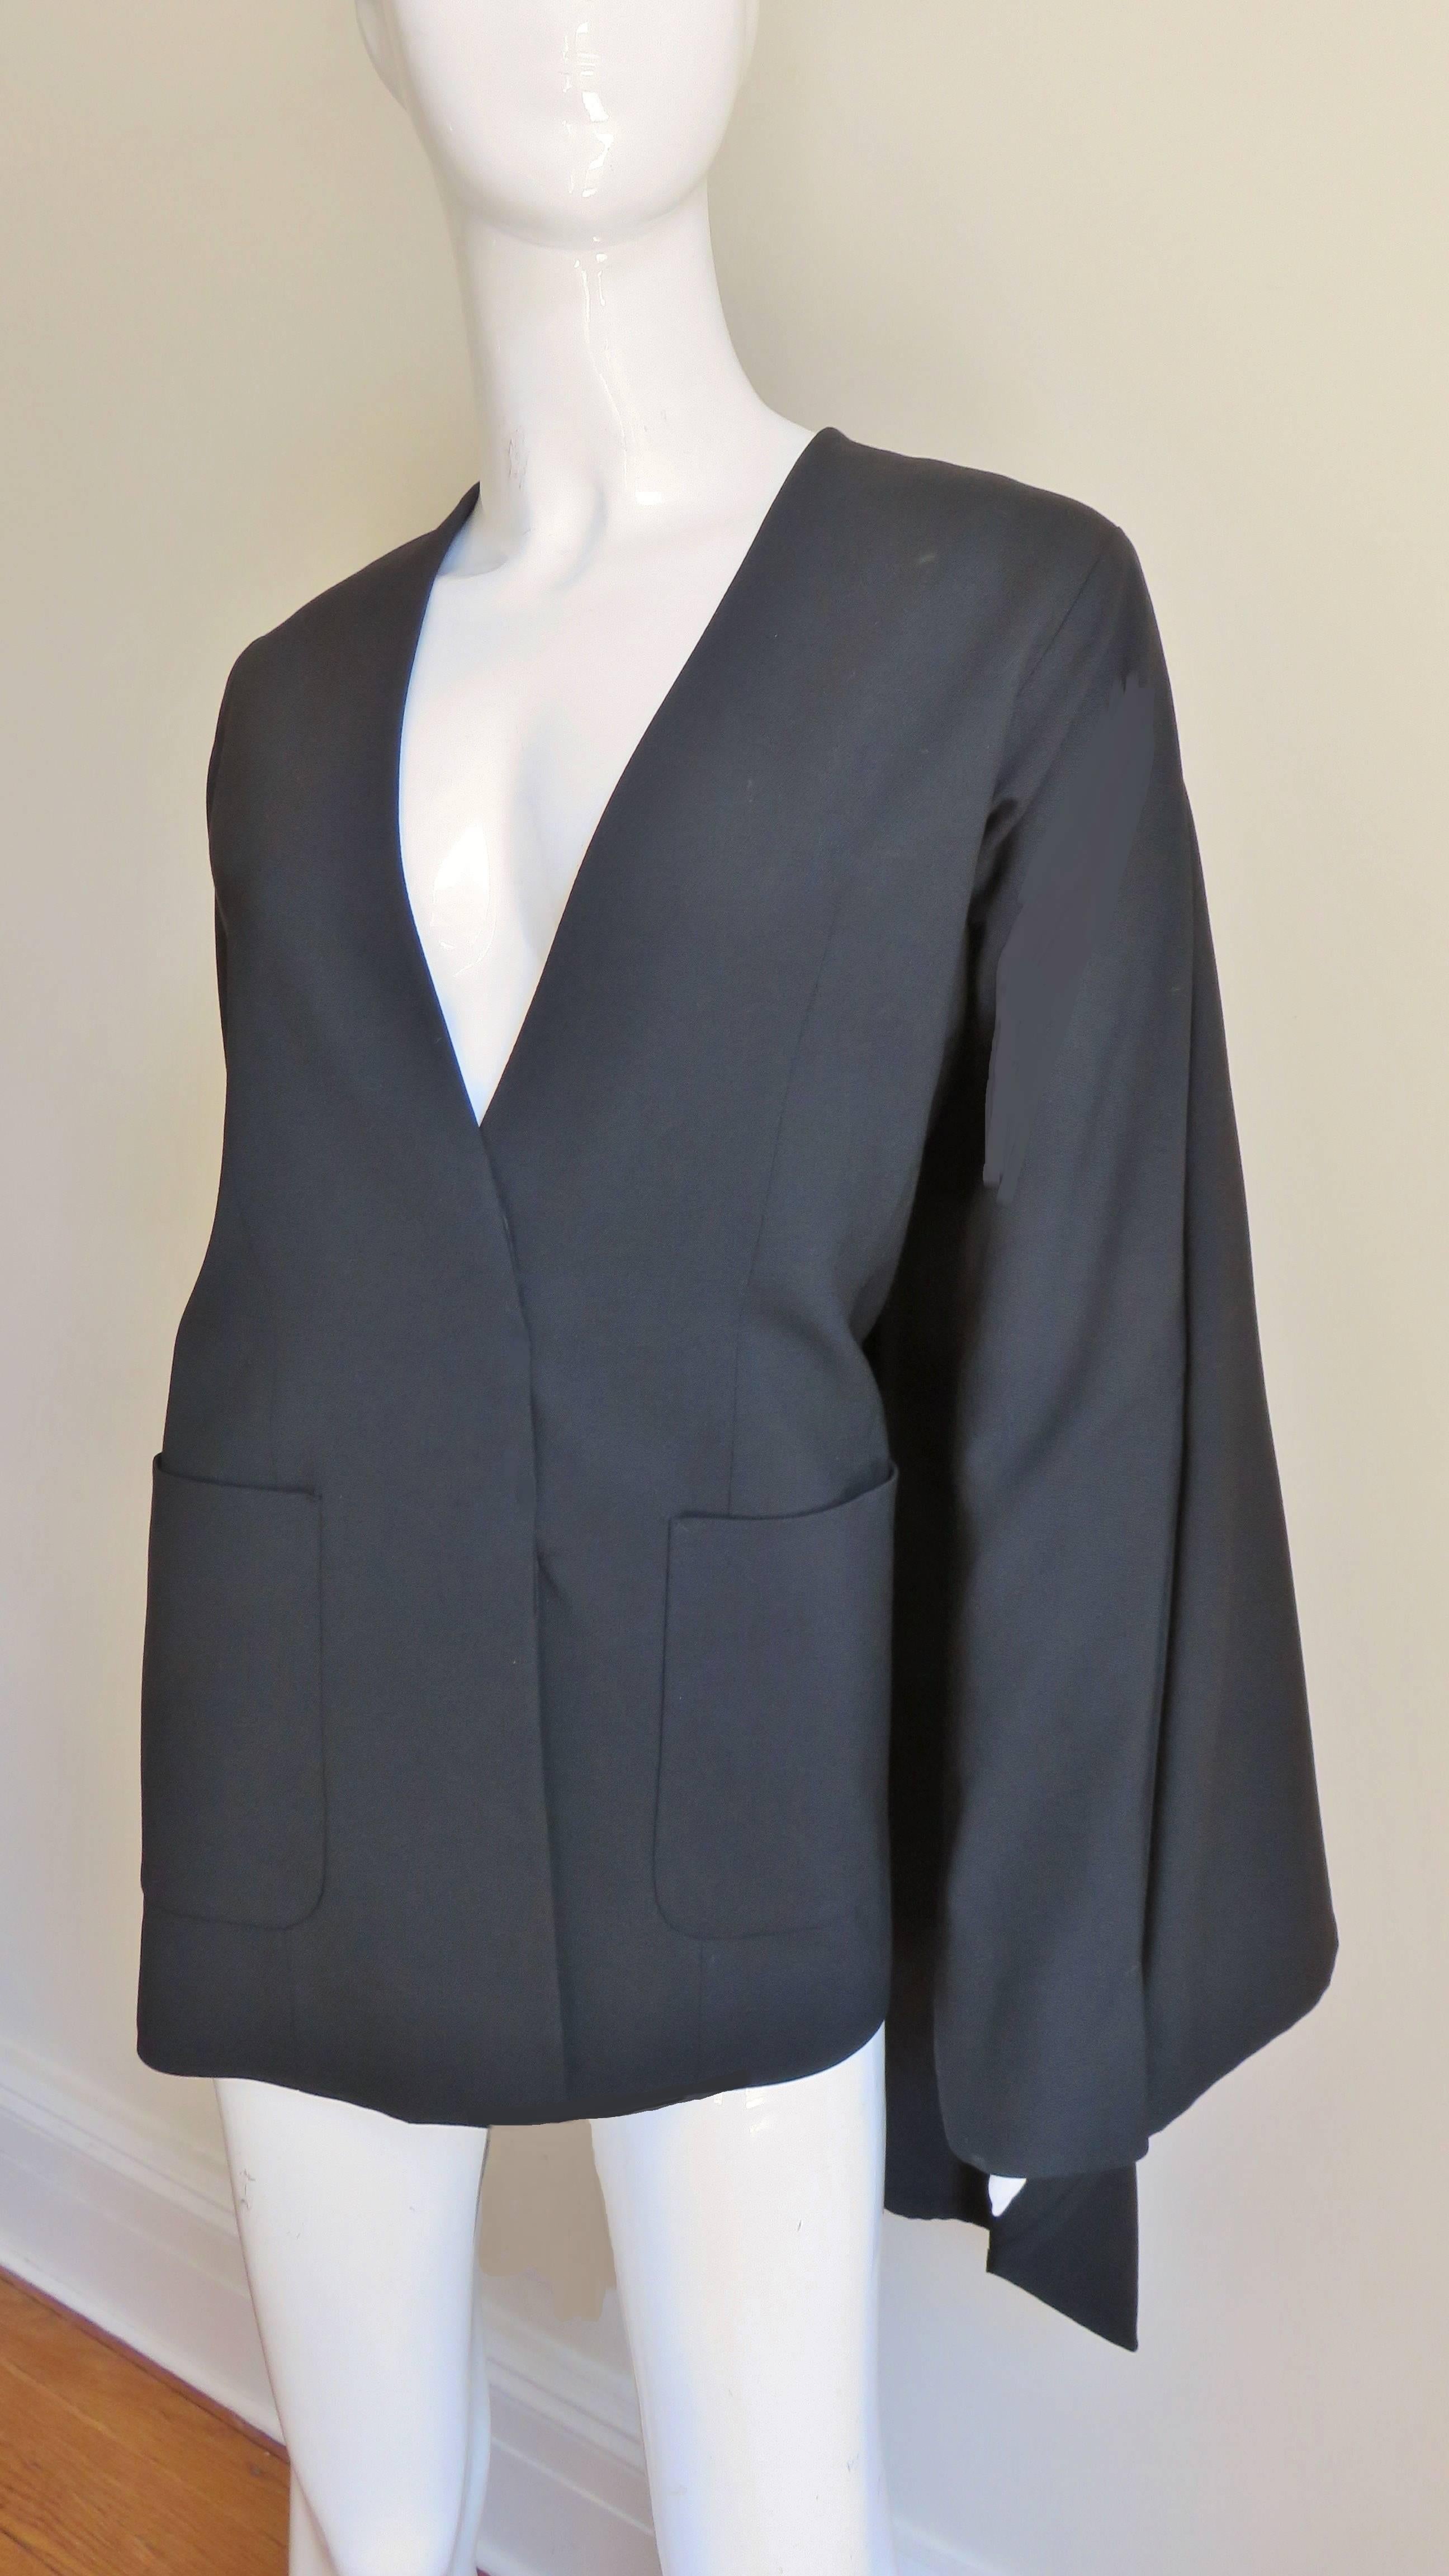 Martin Margiela Cape Back Jacket In Good Condition For Sale In Water Mill, NY